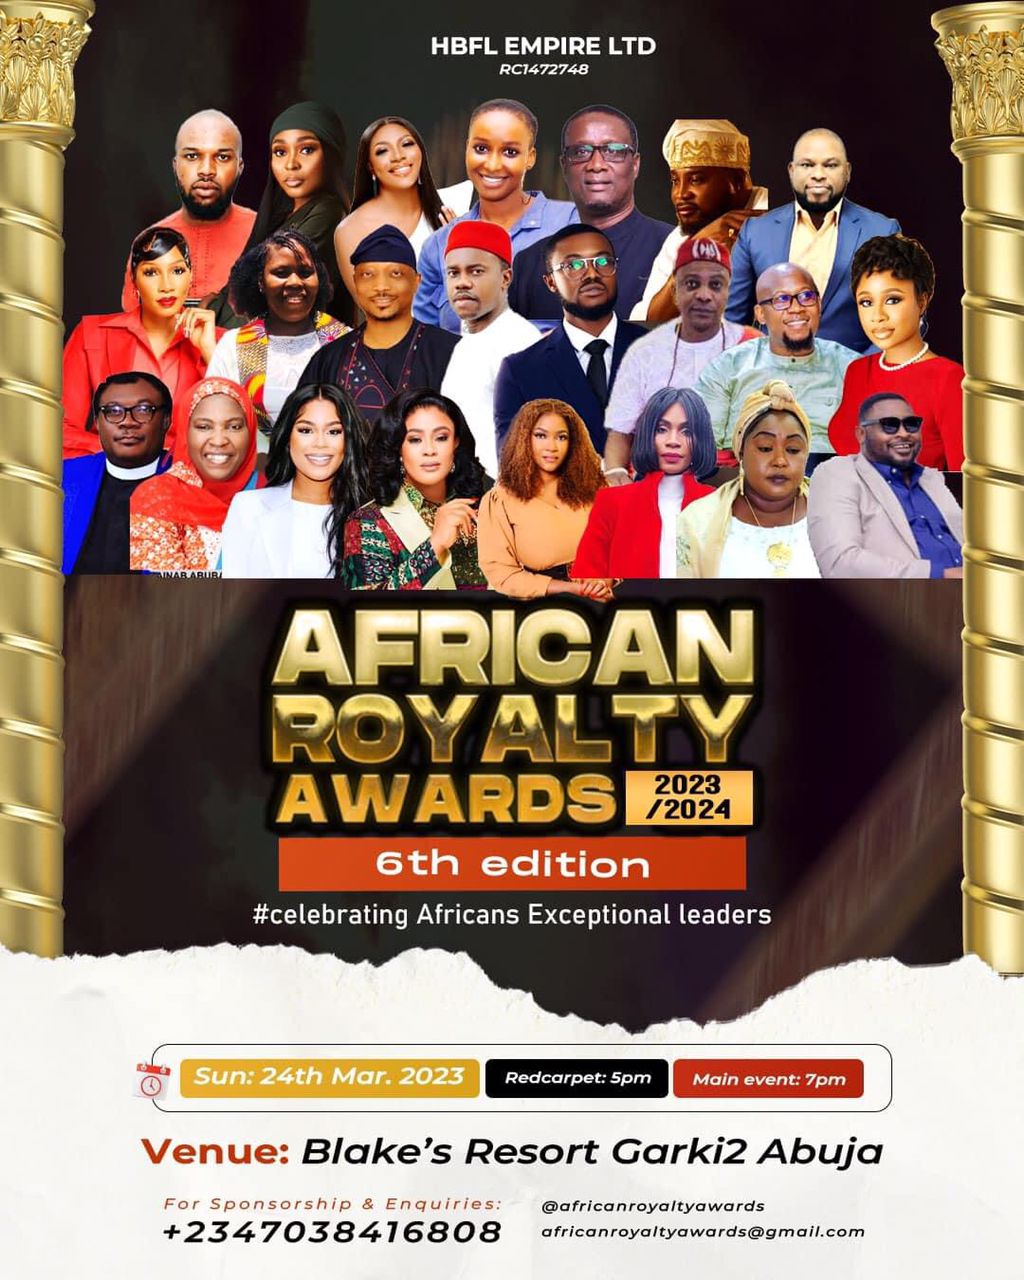 AFRICAN ROYALTY AWARDS: FACE OF ROYALTY AFRICA SETS TO HOST 6TH EDITION TO UNVEIL A NEW QUEEN